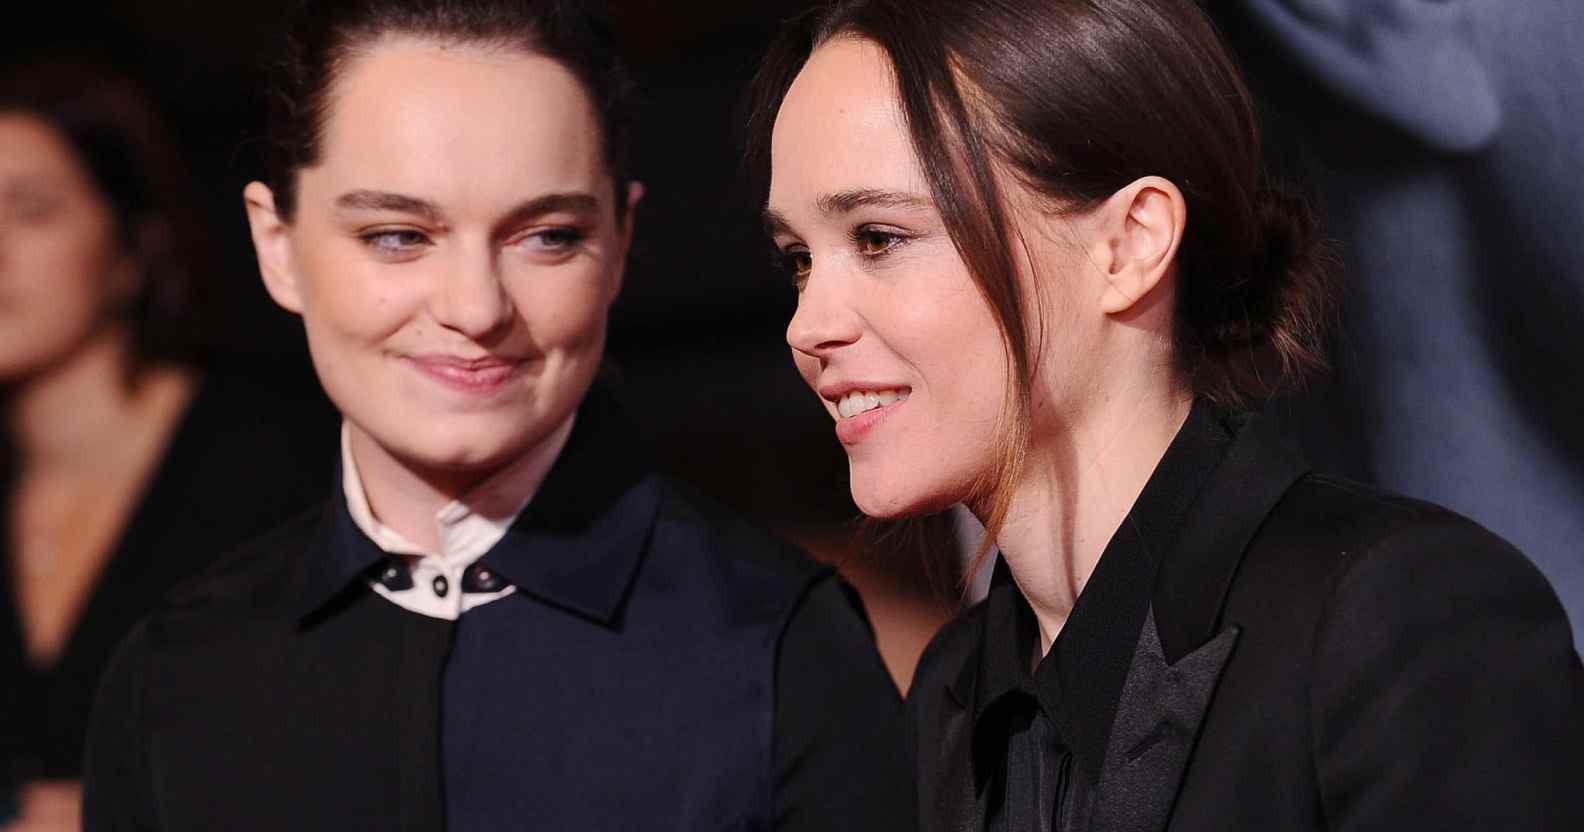 Ellen Page Sex Video - Ellen Page Says Brett Ratner Outed Her at 18 Years Old With a Homophobic  Slur While Filming 'X-Men: The Last Stand' | Decider